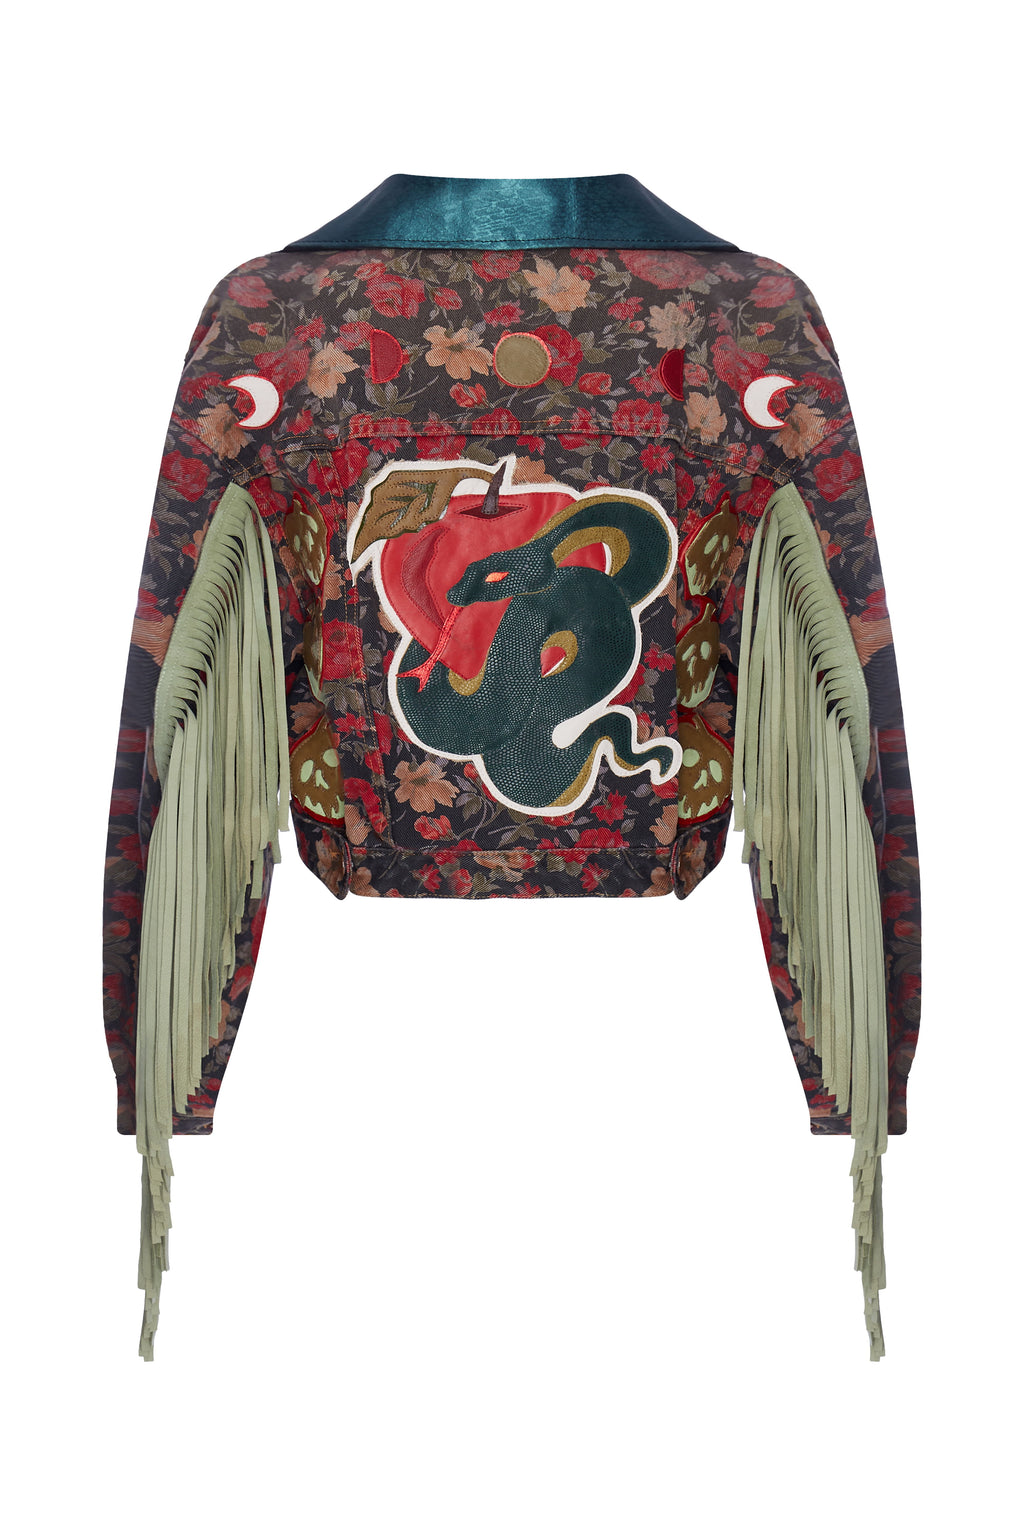 Temptation' Floral Fringed Jacket with Apple and Serpent - Annie's Ibiza